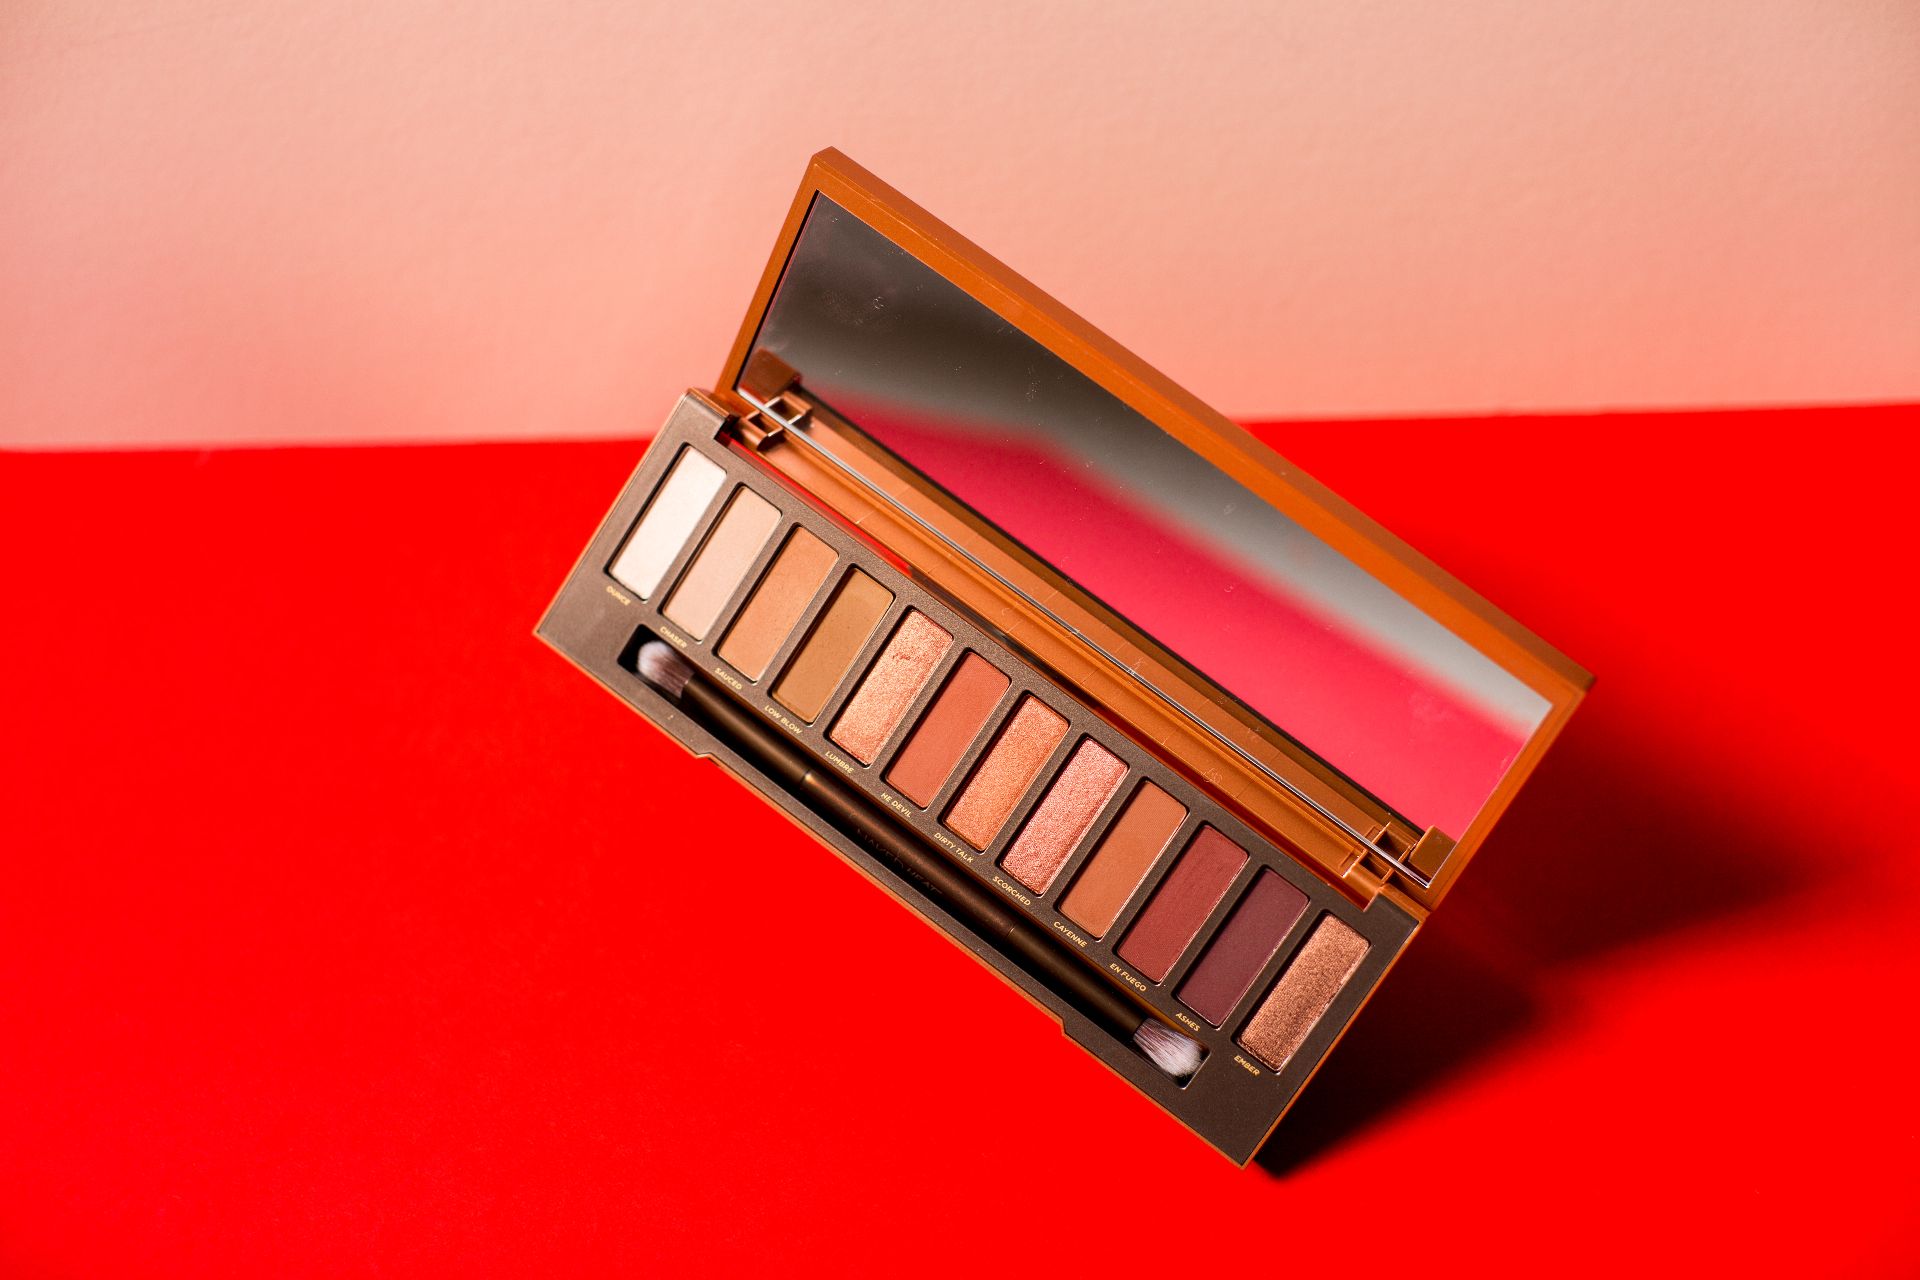 Annas Blogs: Urban Decay Naked 1 & 2 palette review